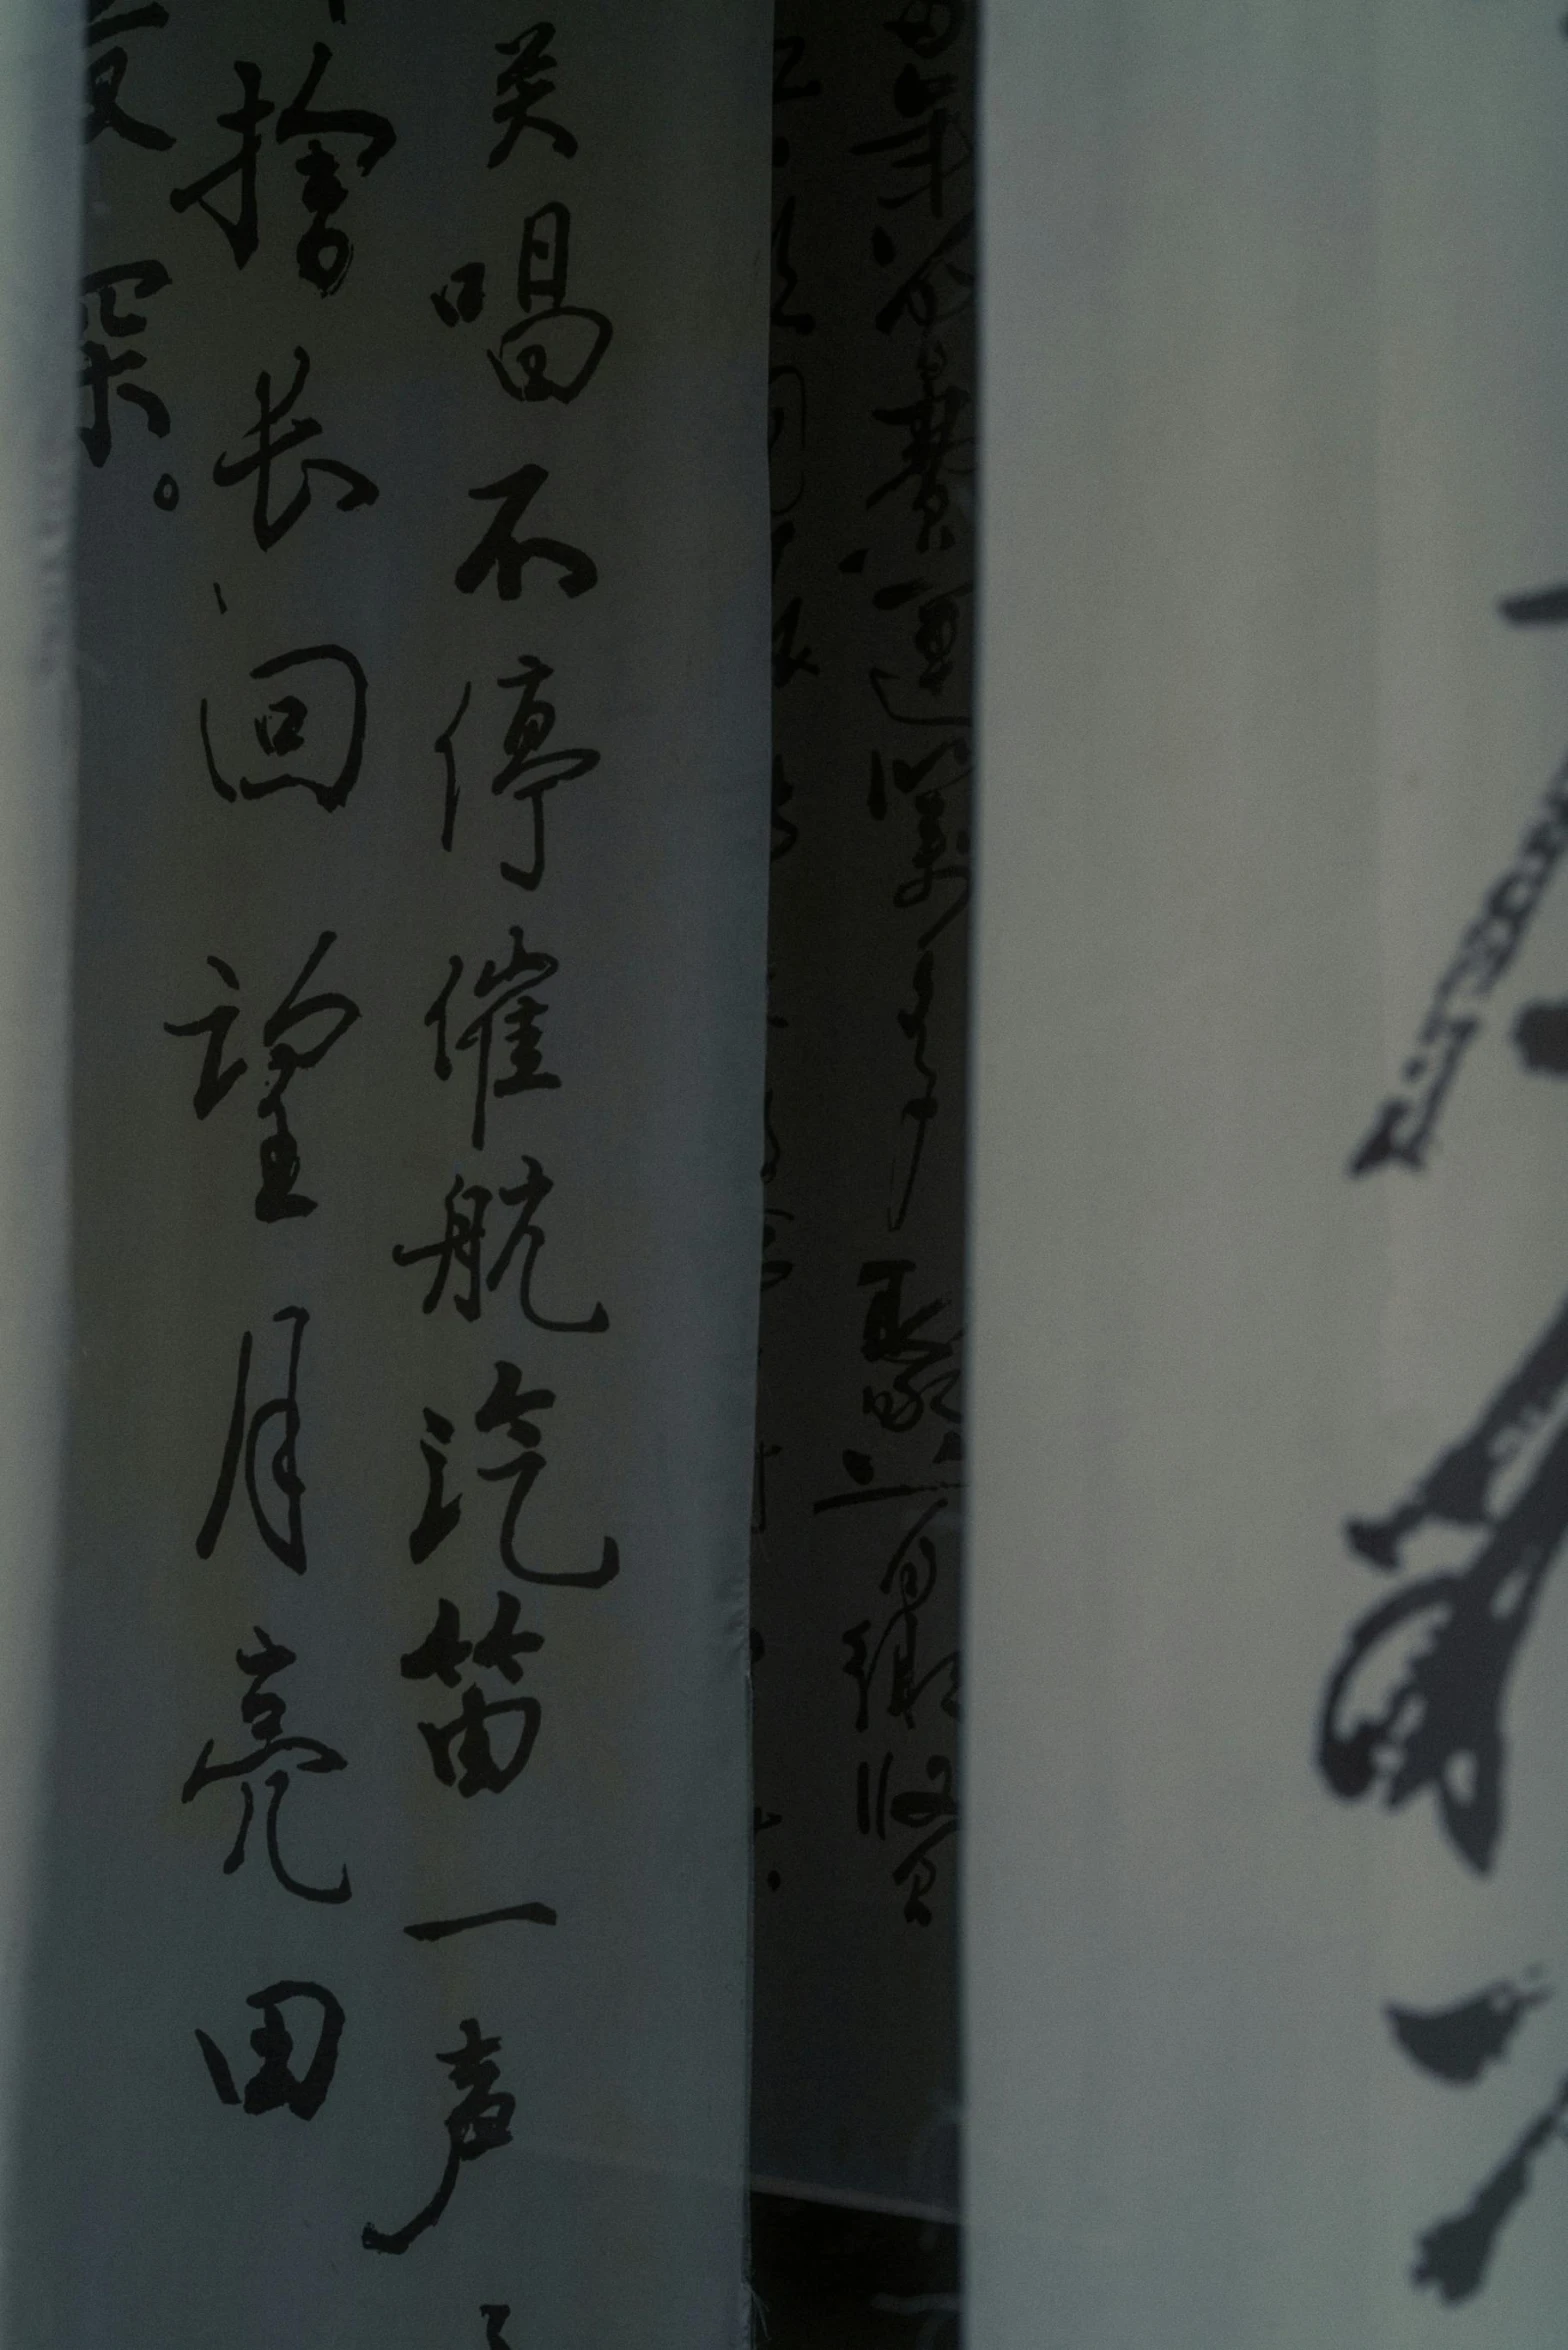 there are many oriental writing on this wall